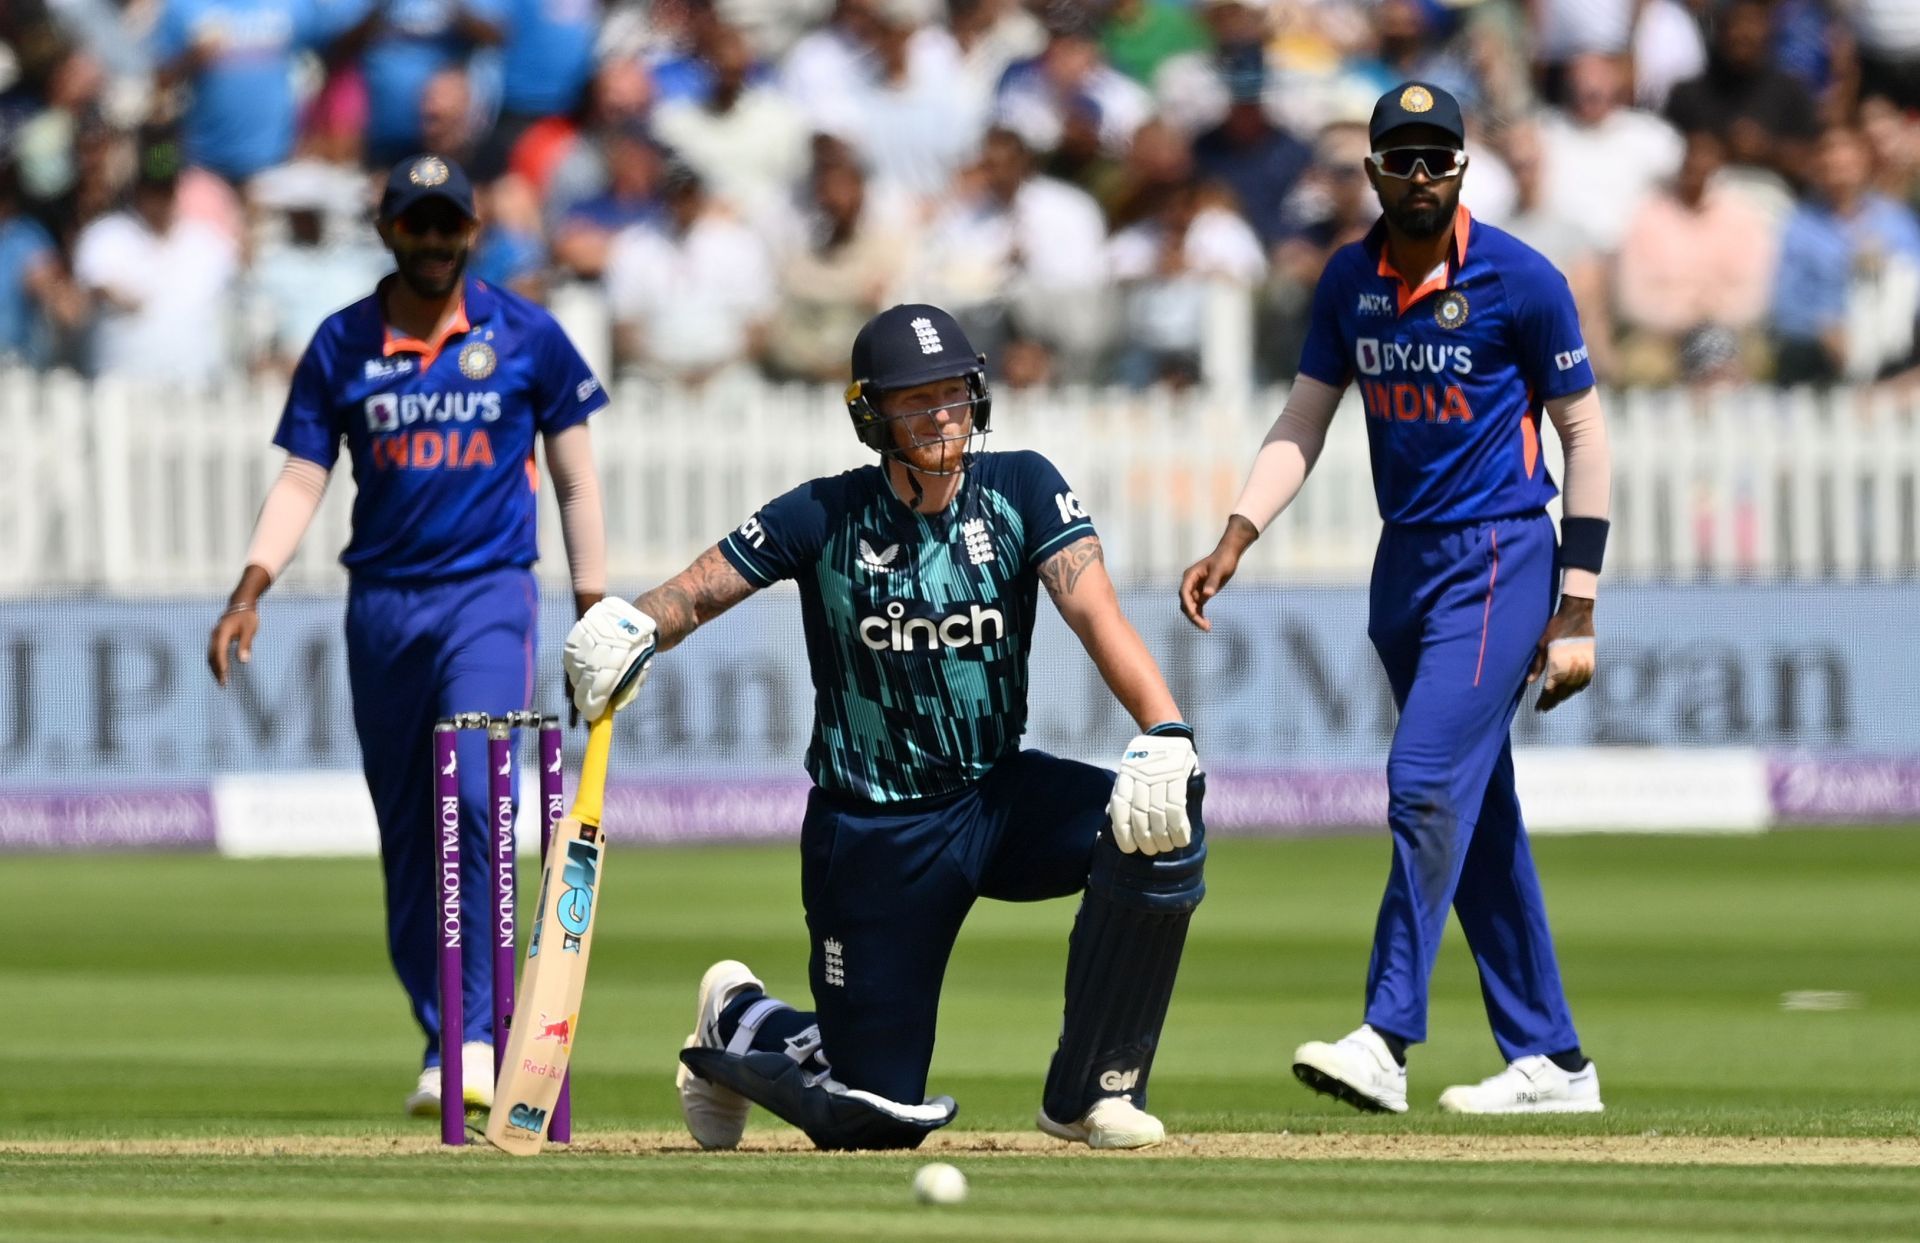 Ben Stokes was dismissed while trying to play a reverse sweep in the second ODI